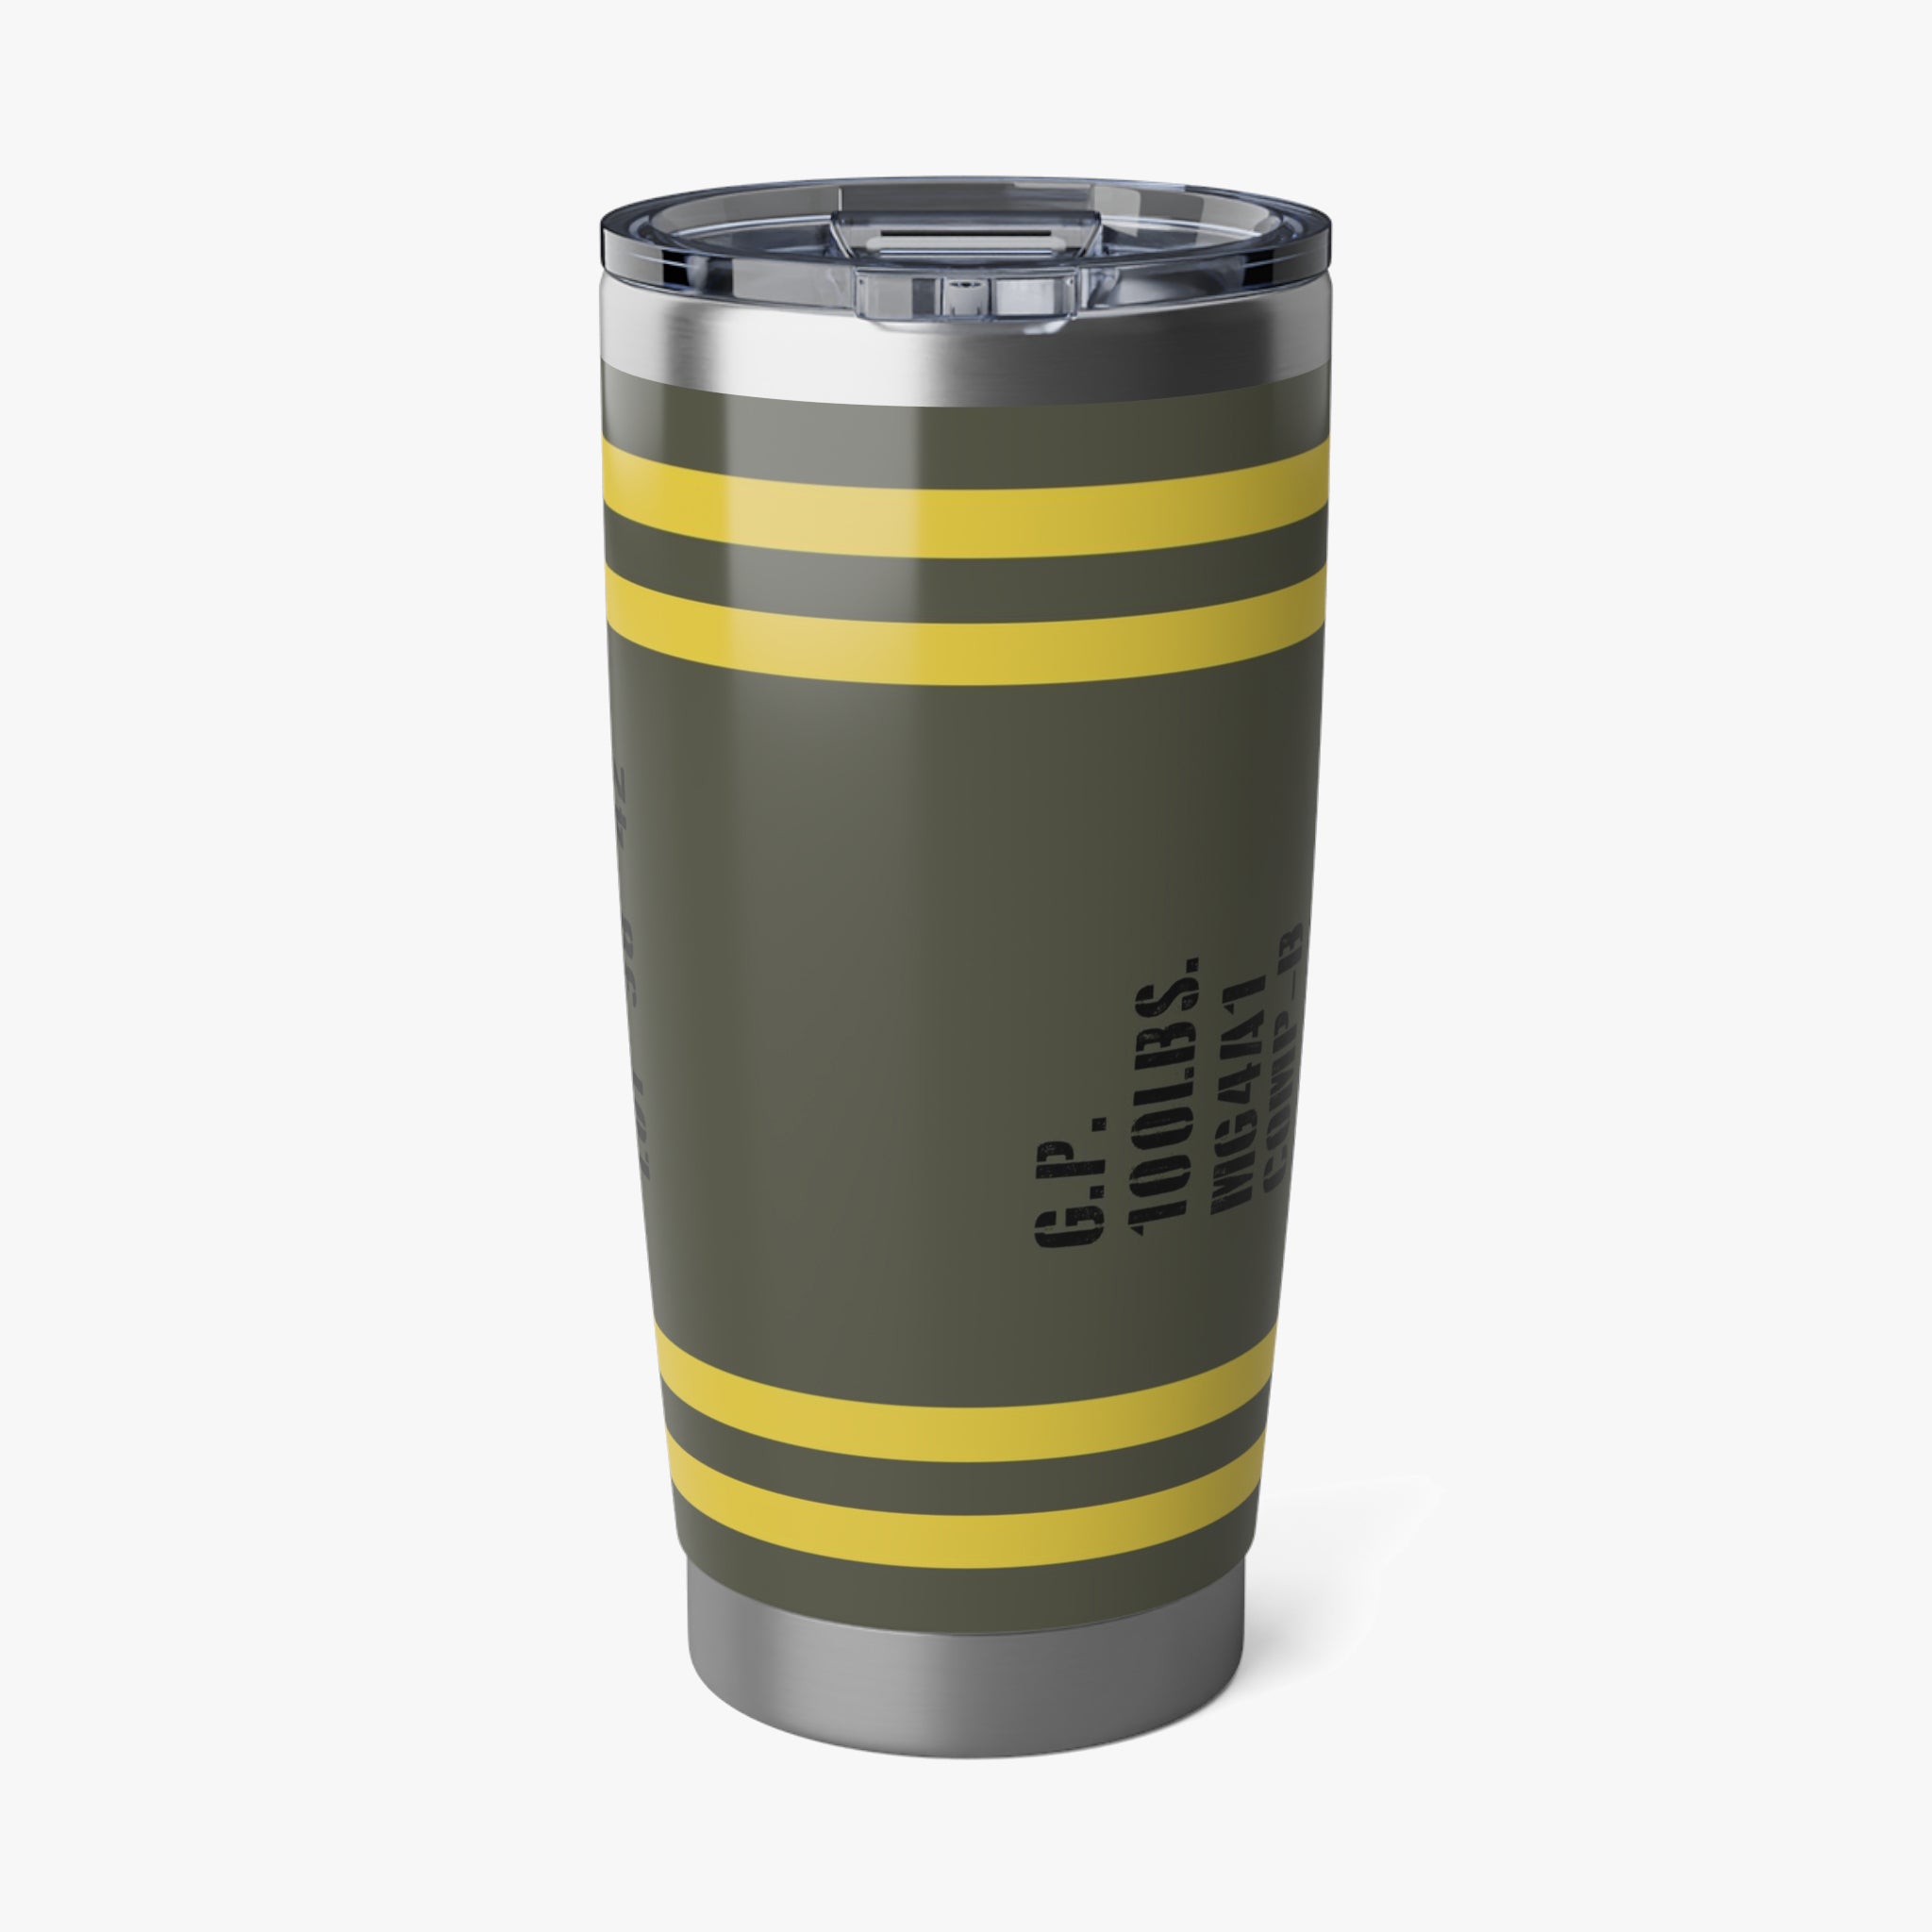 General Purpose WWII 100lbs Bomb Inspired 20oz (590ml) Stainless Steel Tumbler - I Love a Hangar